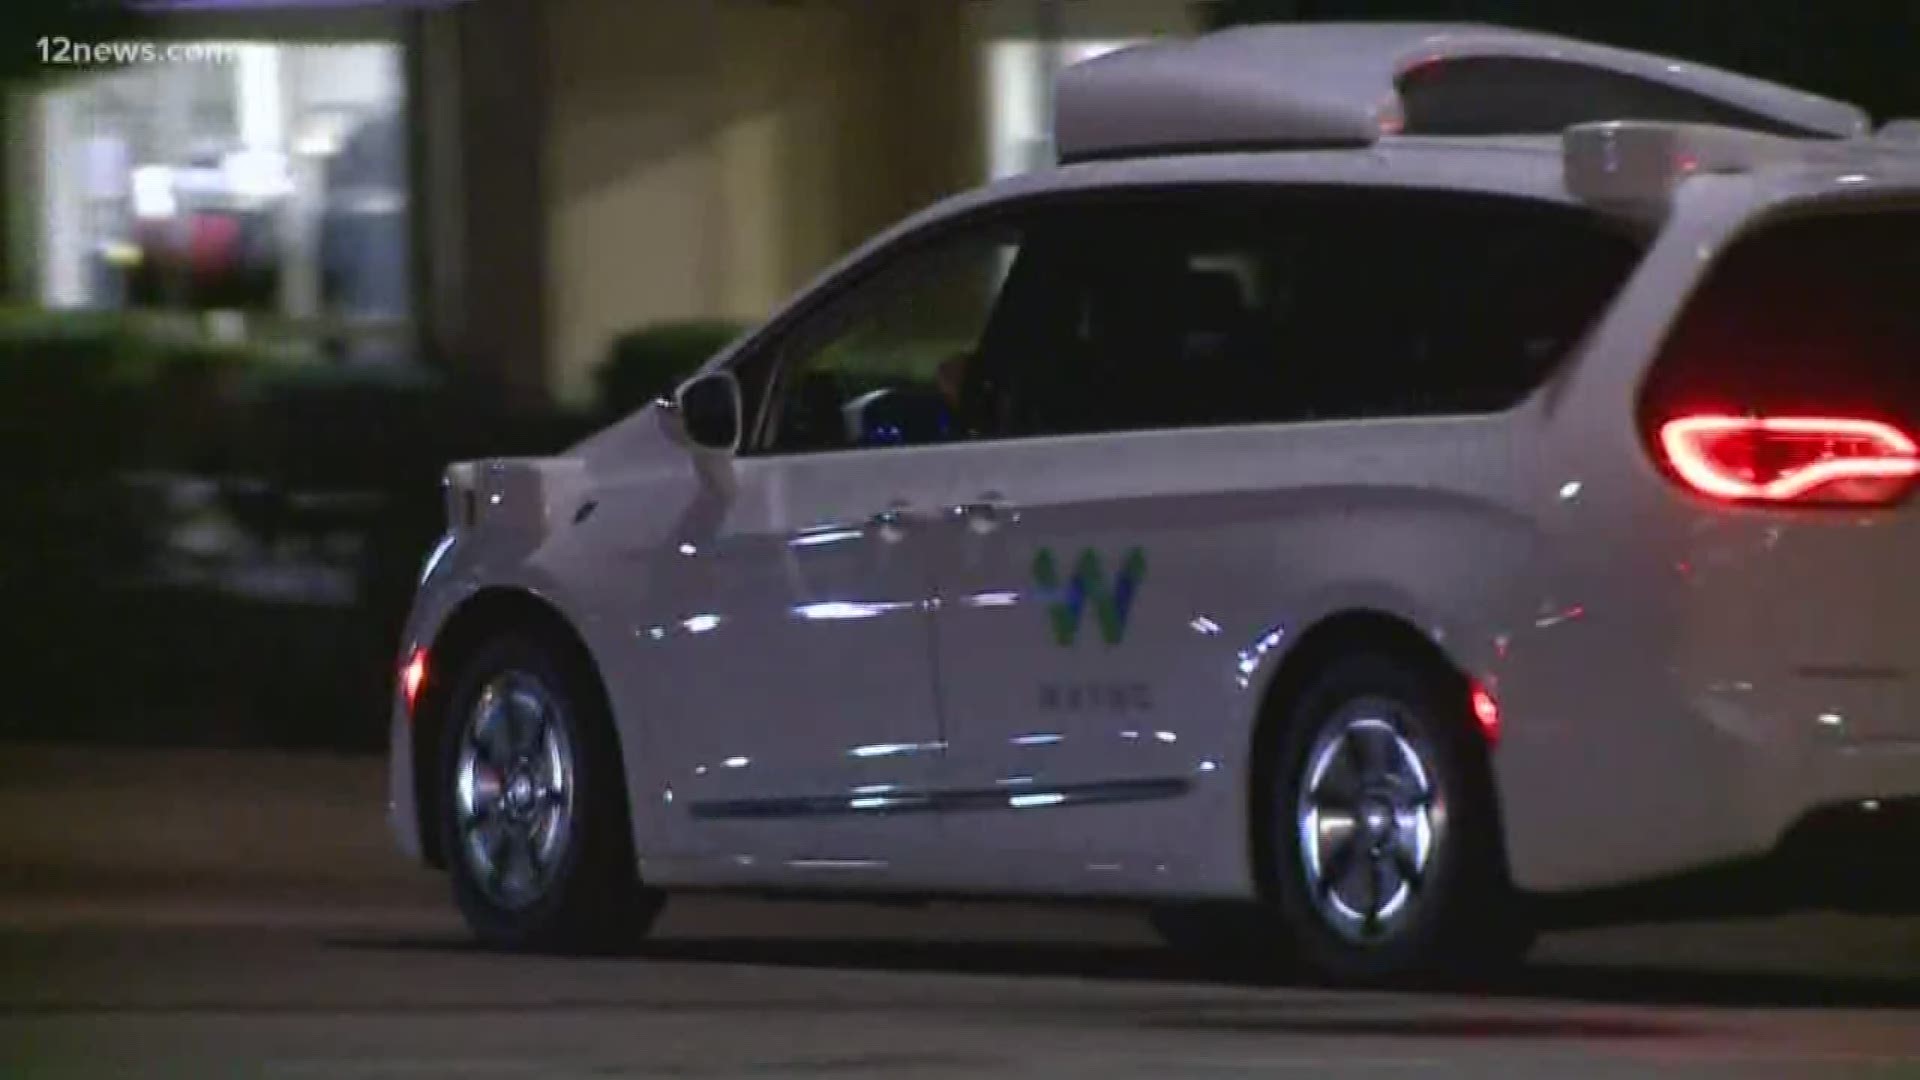 The safety drivers in the self-driving Waymo driverless vans you see in the East Valley are being phased out. Soon riders will get the vans all to themselves.